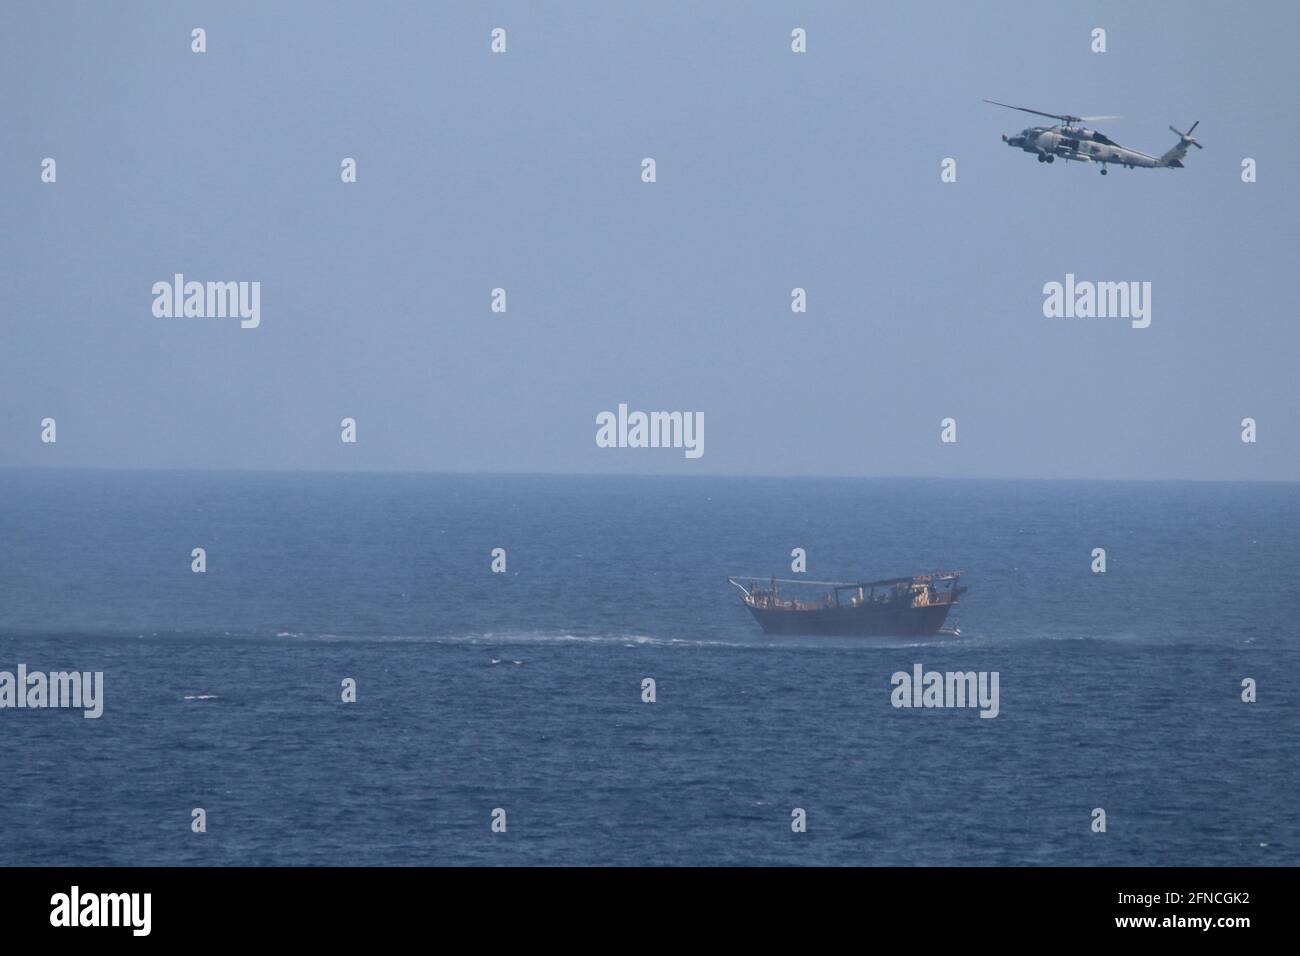 This photo, released on May 6, 2021, shows an SH-60 Seahawk helicopter assigned to the guided-missile cruiser USS Monterey (CG 61)(not shown) flies above a stateless dhow interdicted with a shipment of illicit weapons in international waters of the North Arabian Sea on May 6-7. As conducted by the U.S. Fifth Fleet, maritime security operations entail routine patrols to determine the pattern of life in the maritime and enhance mariner-to-mariner relations. These operations reassure allies and partners and preserve freedom of navigation and free flow of commerce. Photo by U.S. Navy/UPI Stock Photo